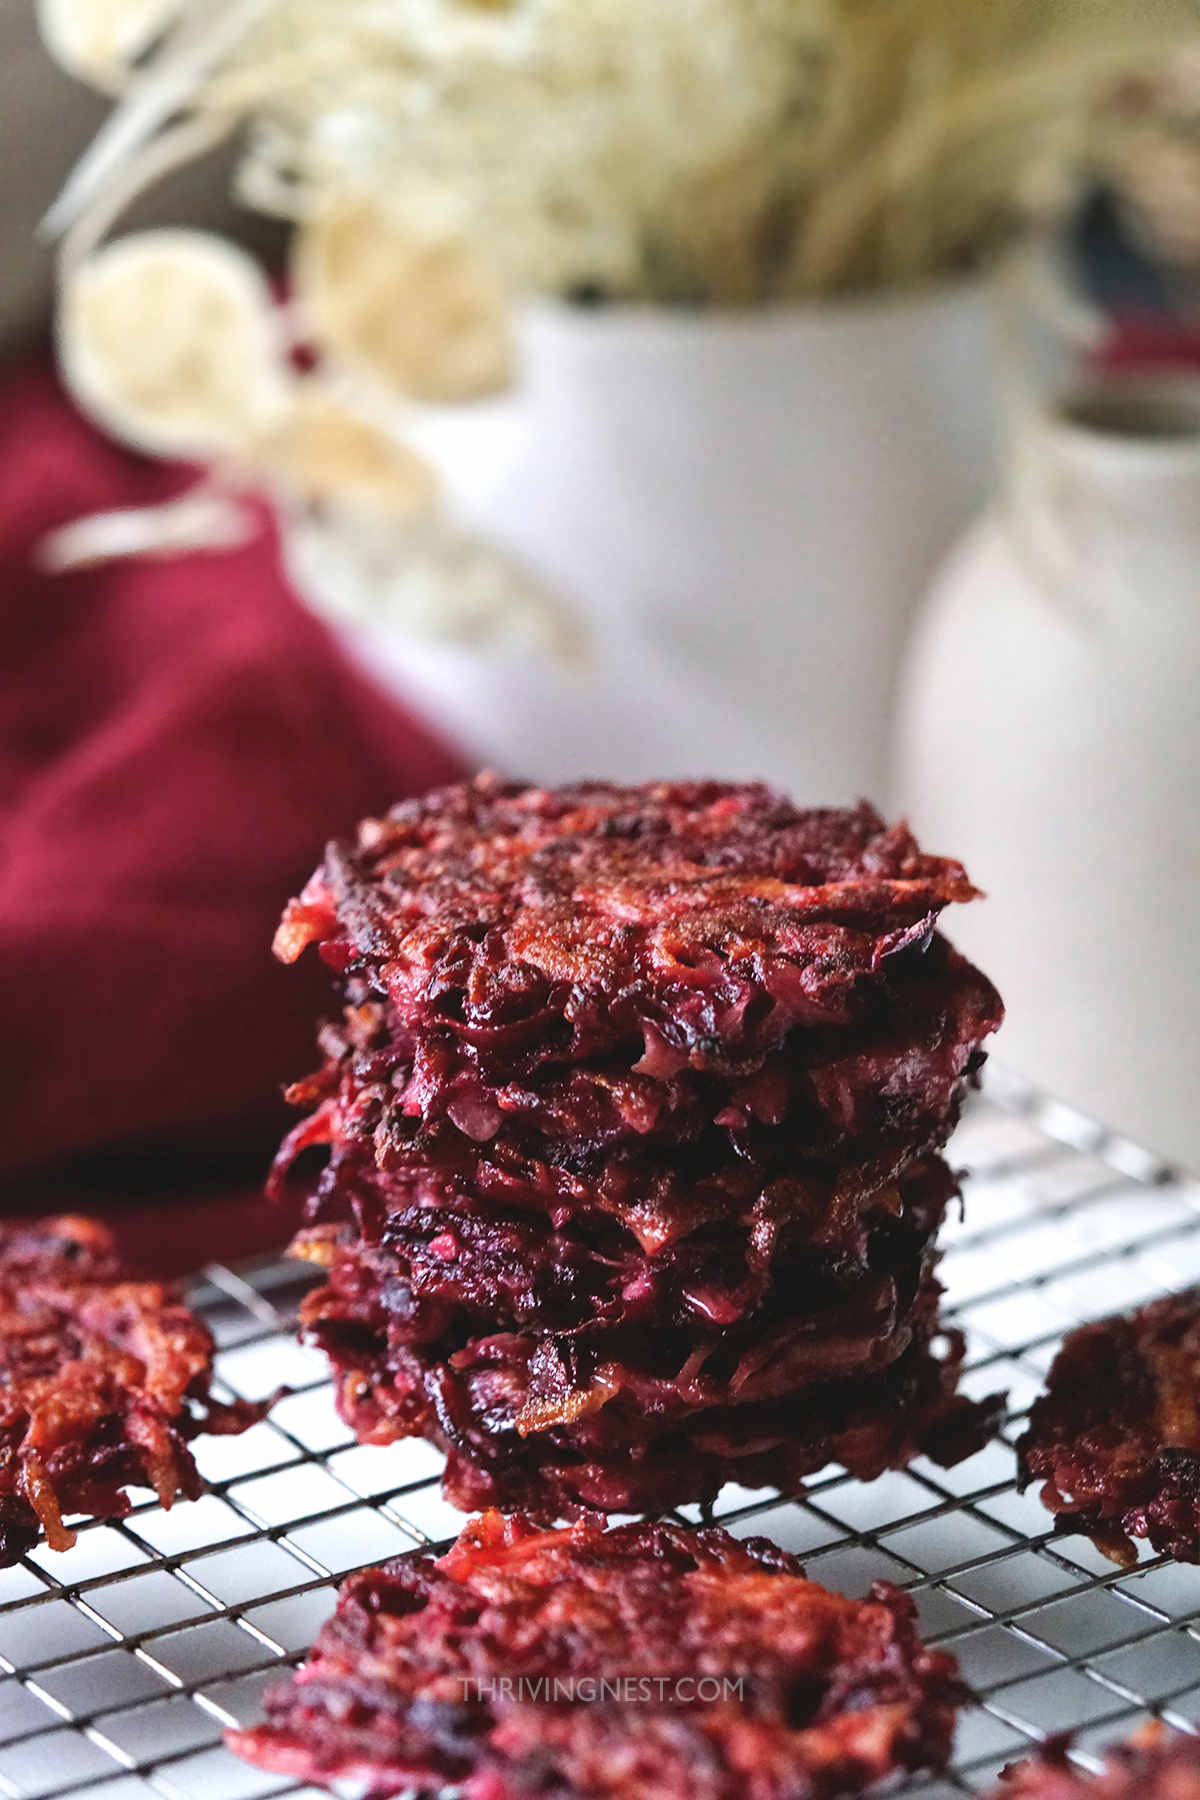 Beet fritters/patties or latkes made with grated beetroot, potato and apple.